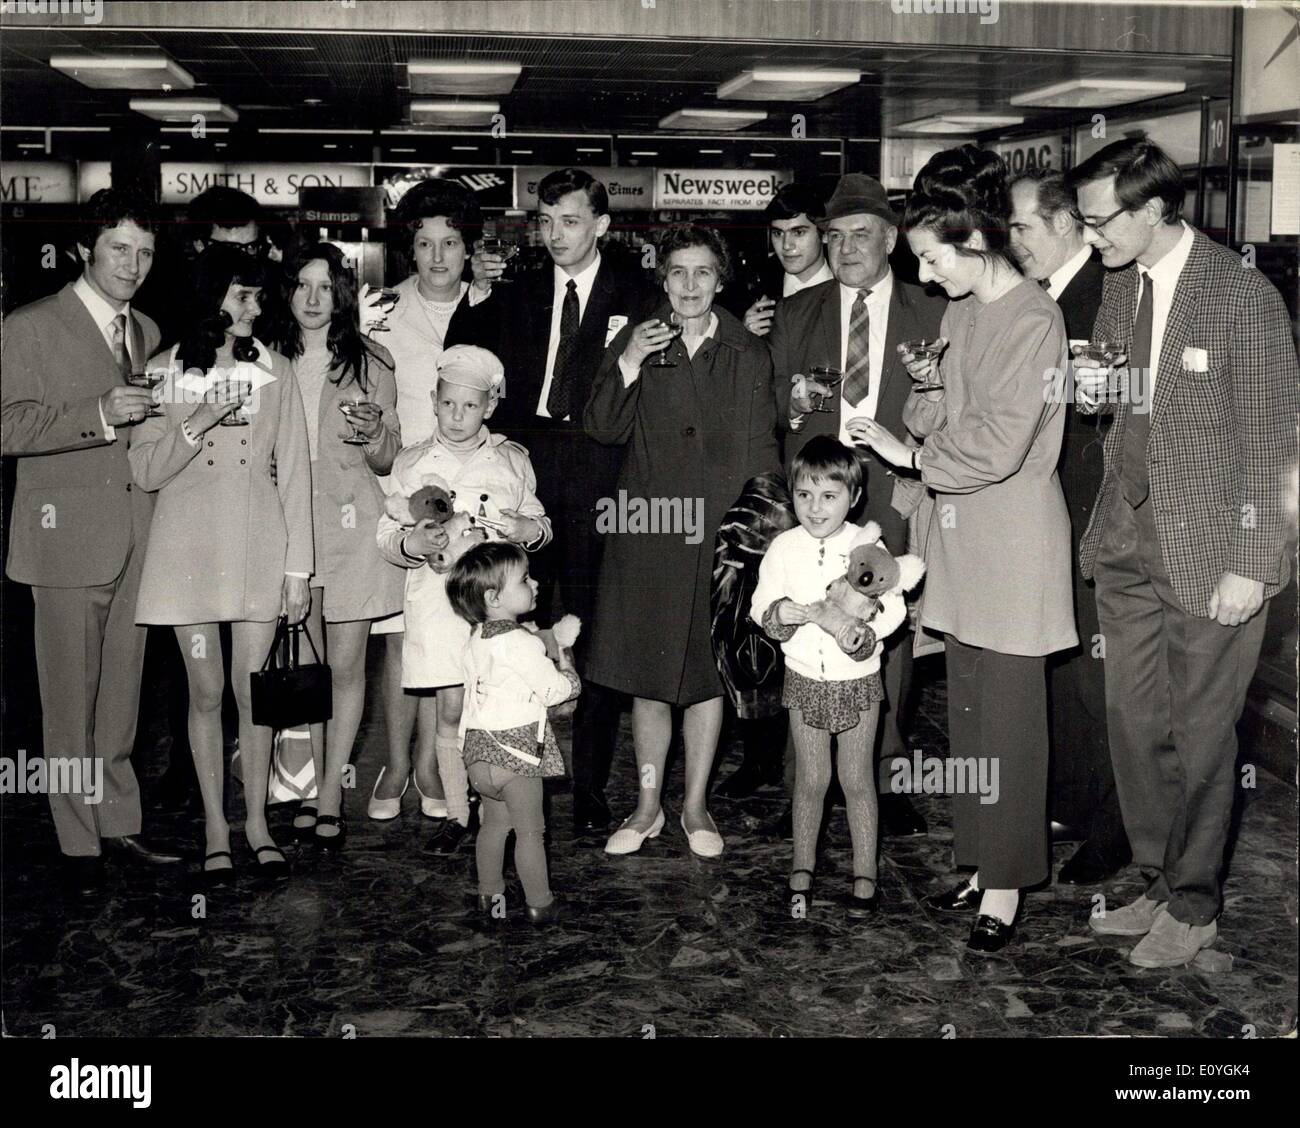 Apr. 27, 1970 - Who Cooked This One Up: 16 Emigrants With The Same Name Fly To Australia. Sixteen British migrants flying to Australia got a champagne send-off today from London - Airport - just because they have the same name. The and coincidence should also ensure a special welcome when they arrive in Sydney, exactly 200 years after their famous namesake Captain James Cook. The emigrants, all named cook or cooke, will land at Sydney's international airport within sight of Botany Bay where Captain Cook first landed in Australia on April 29. 1770. The 13,000 mile trip in B.O.A.C Stock Photo